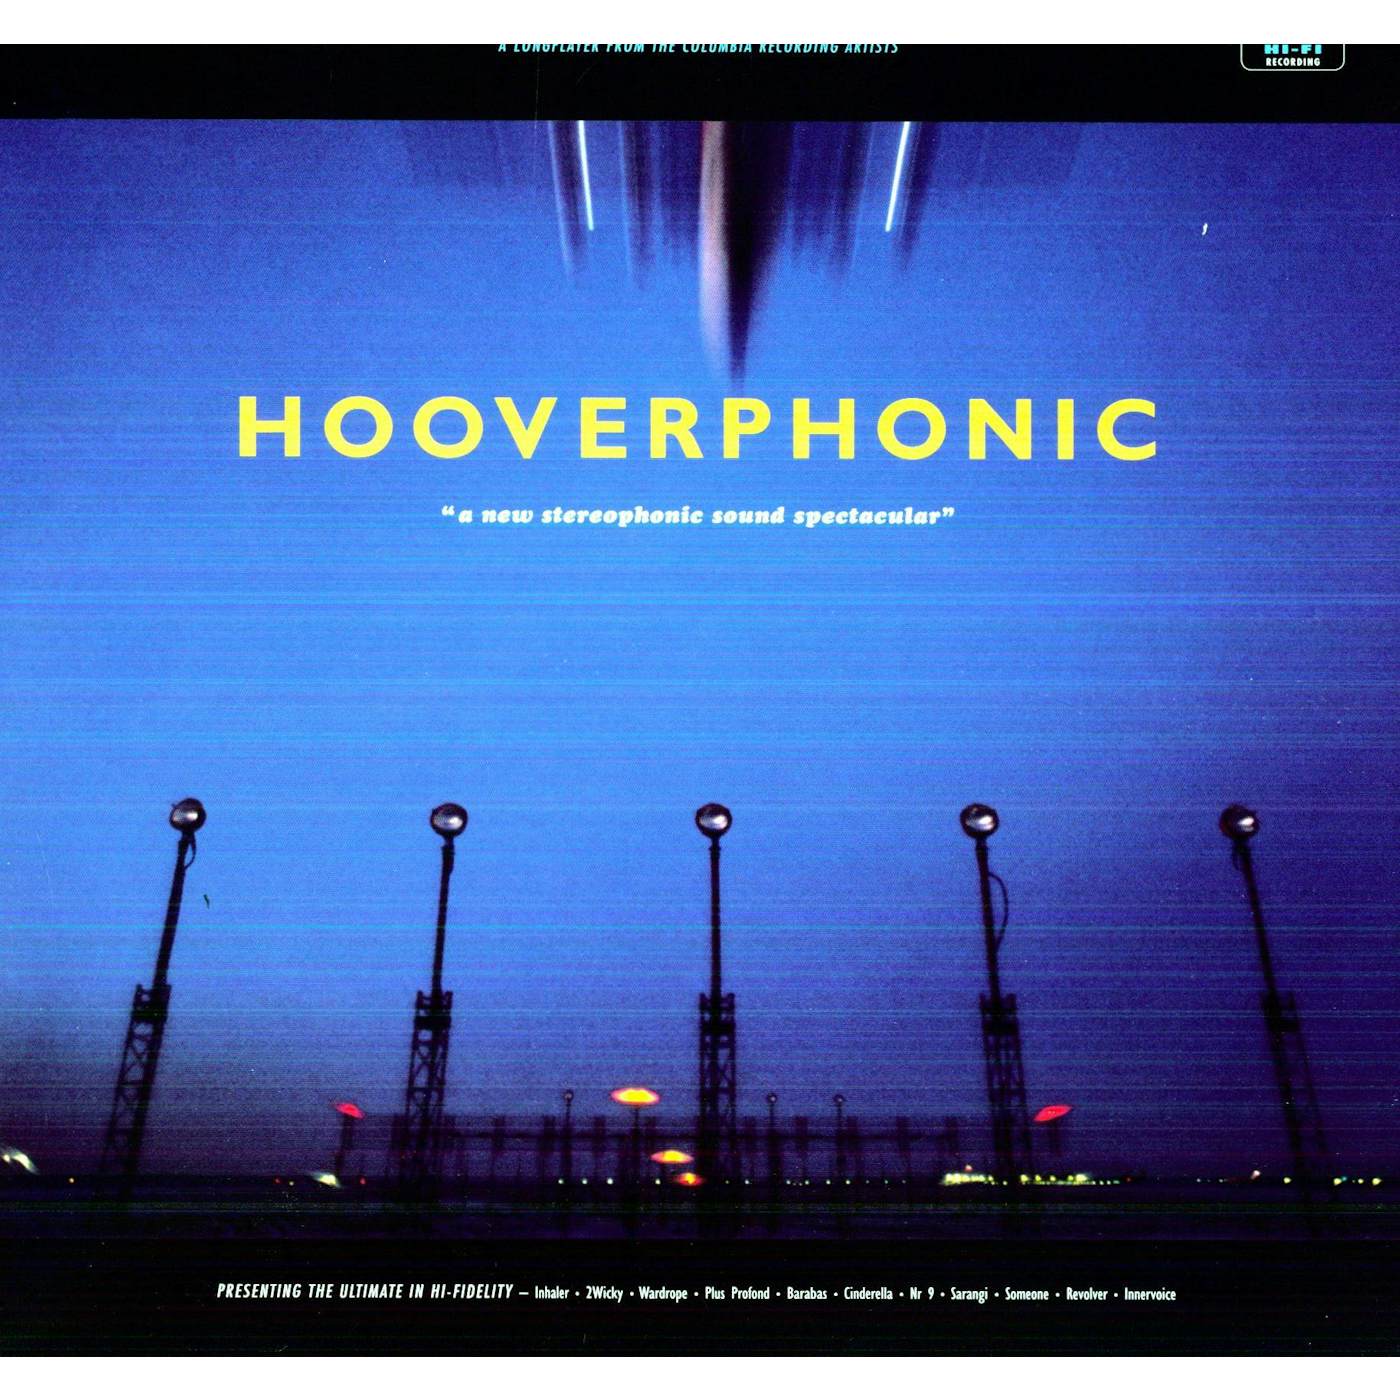 Hooverphonic NEW STEREOPHONIC SOUND SPECTACULAR Vinyl Record